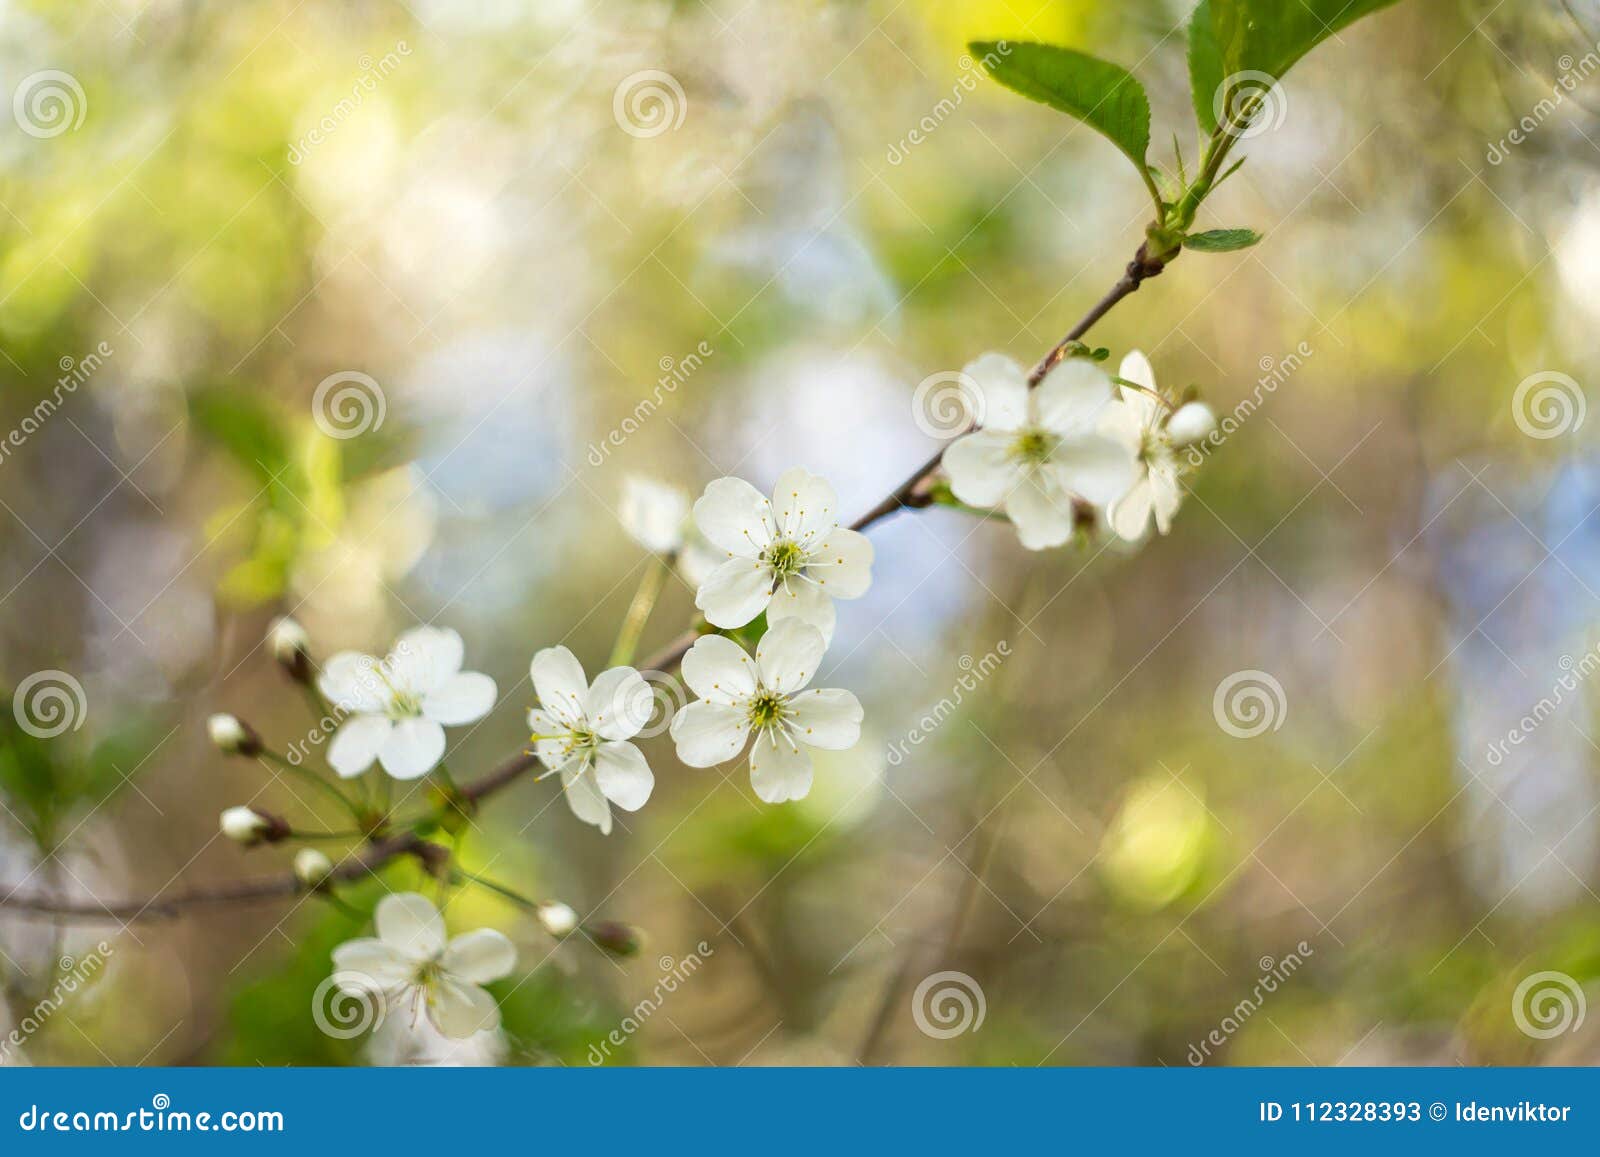 Spring Bloom Flower Cherry With Bokeh Closeup Stock Image Image Of